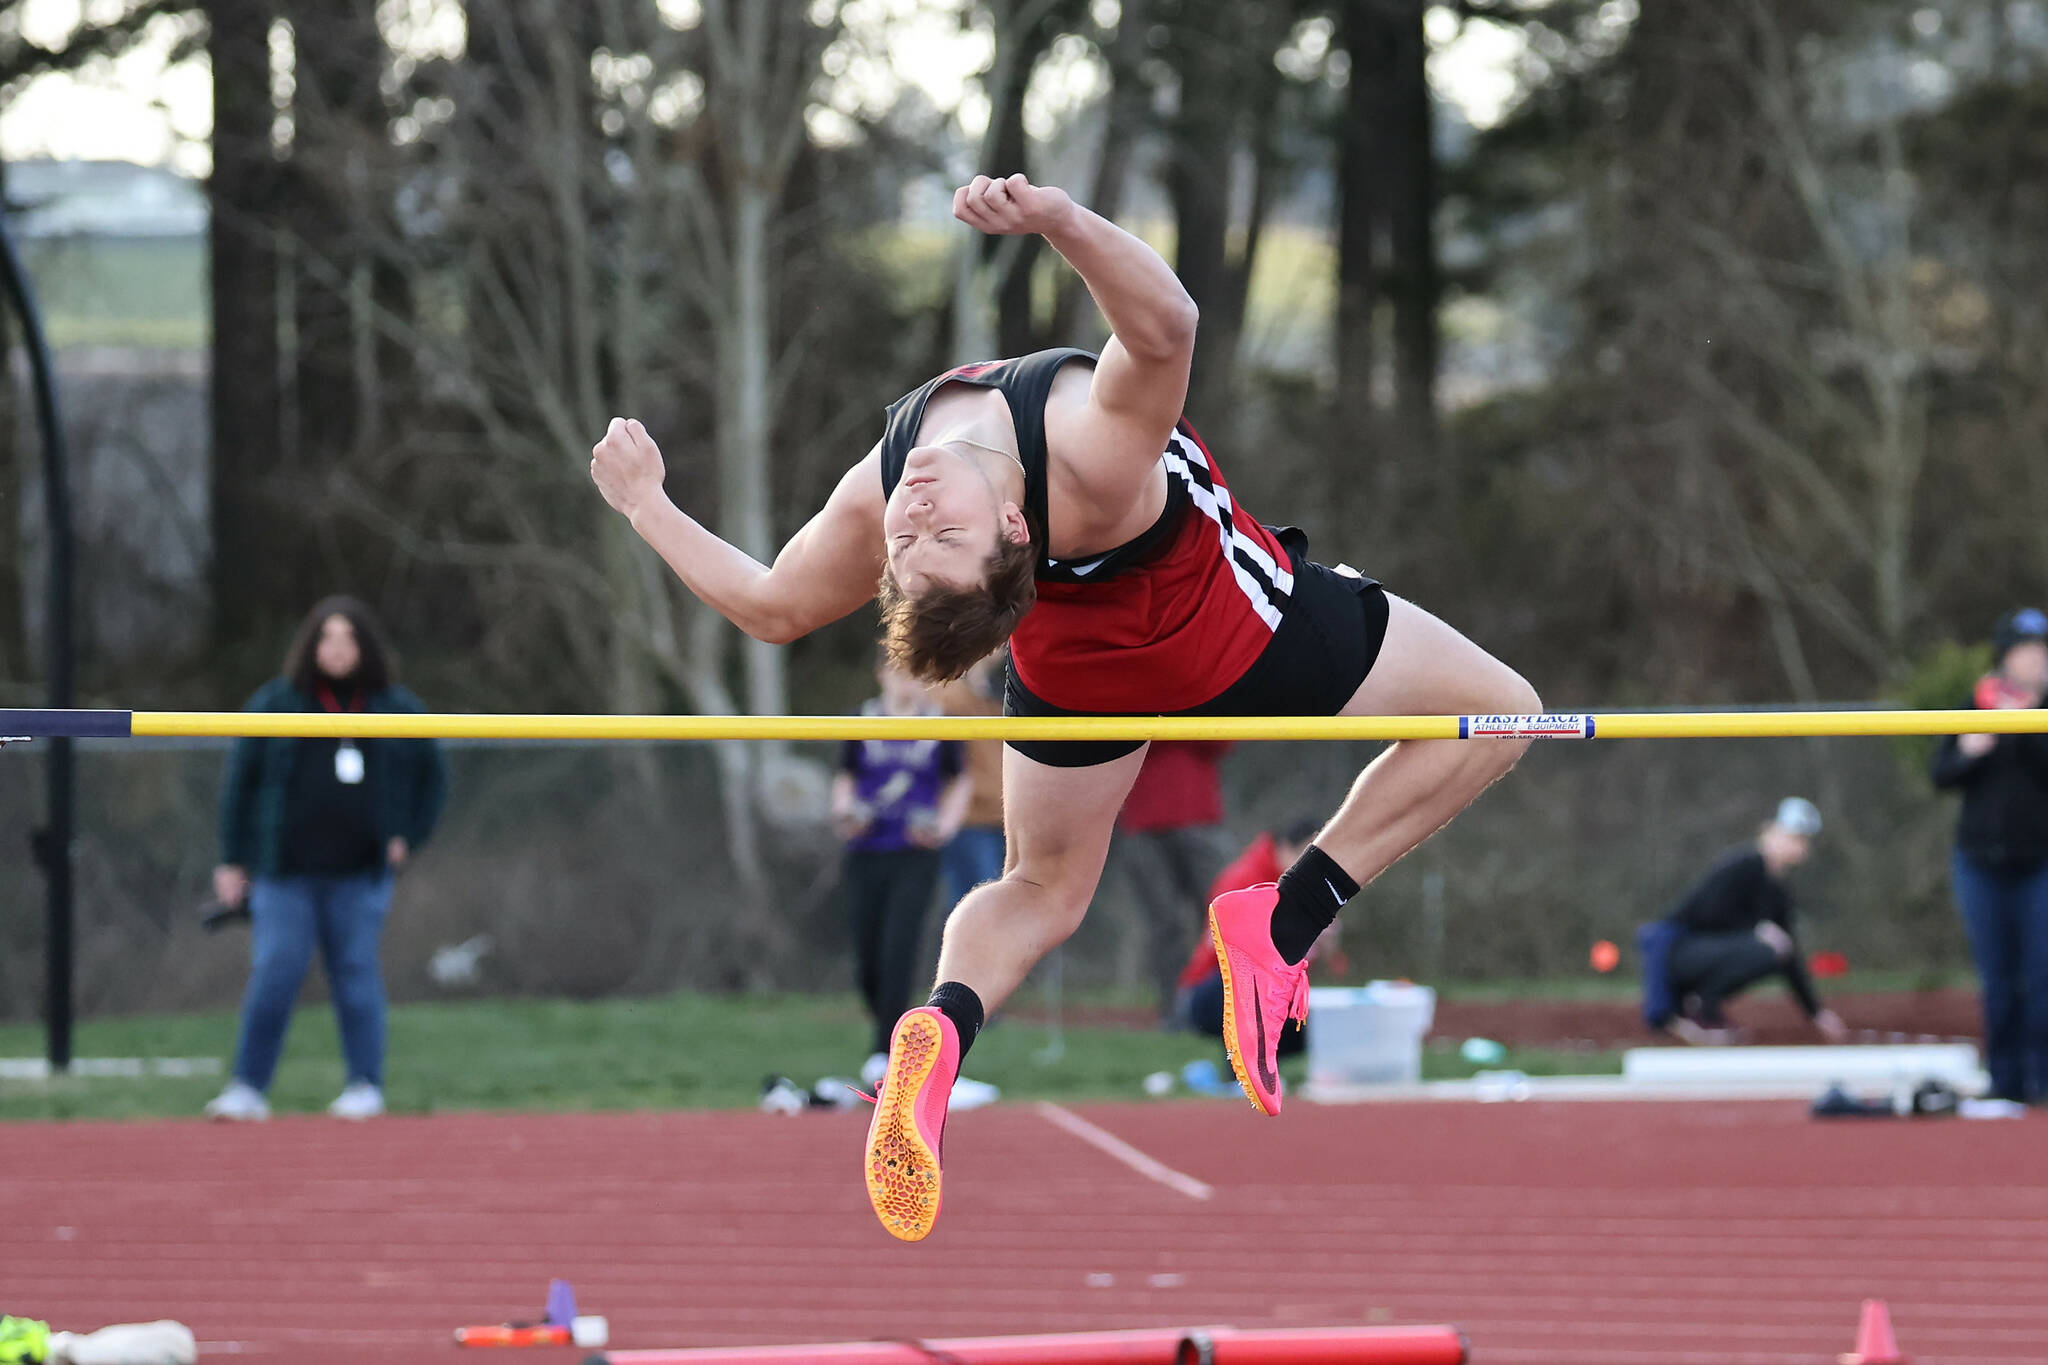 Senior Dominic Coffman competes in the high jump March 22 during Coupeville High School’s first home track and field meet of the season. Coffman took second place in the event with a jump of 5-08. (Photo by John Fisken)